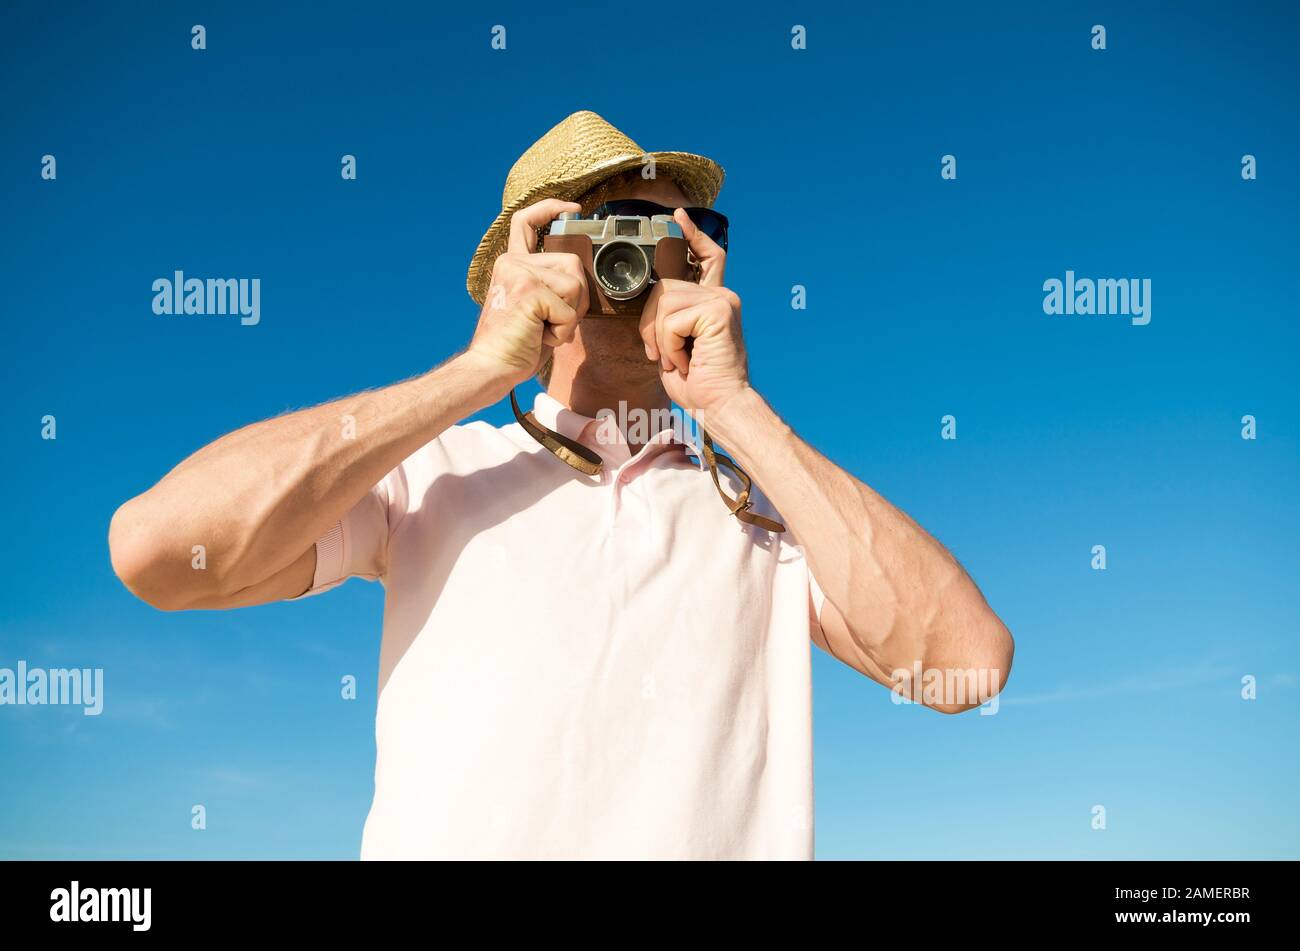 Tourist photographer taking a photo with an old fashioned point and shoot camera in front of bright blue sky copy space Stock Photo